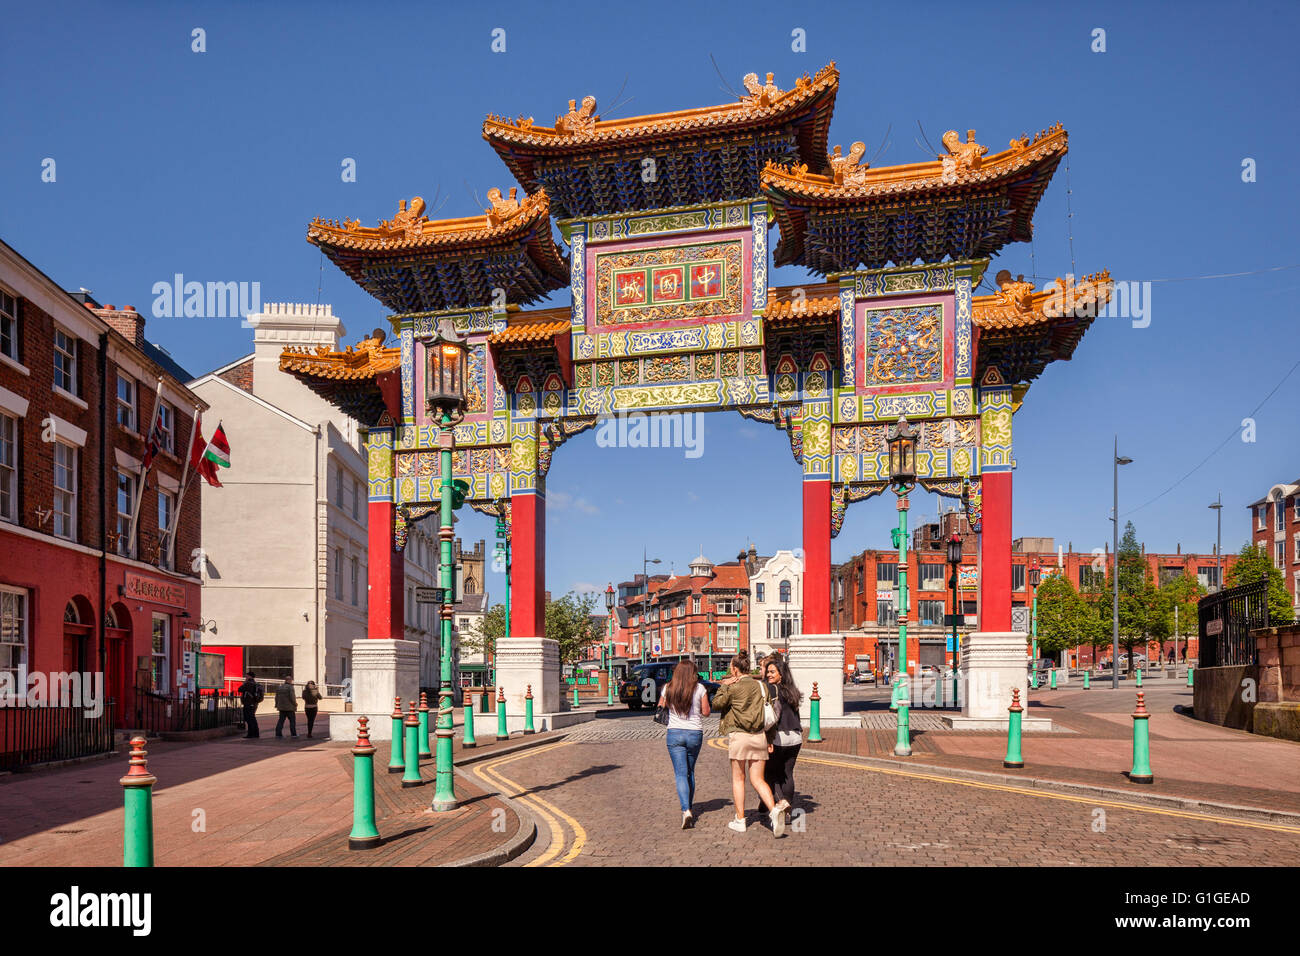 The Chinatown Arch on Nelson Street, Liverpool, Merseyside, England. Stock Photo